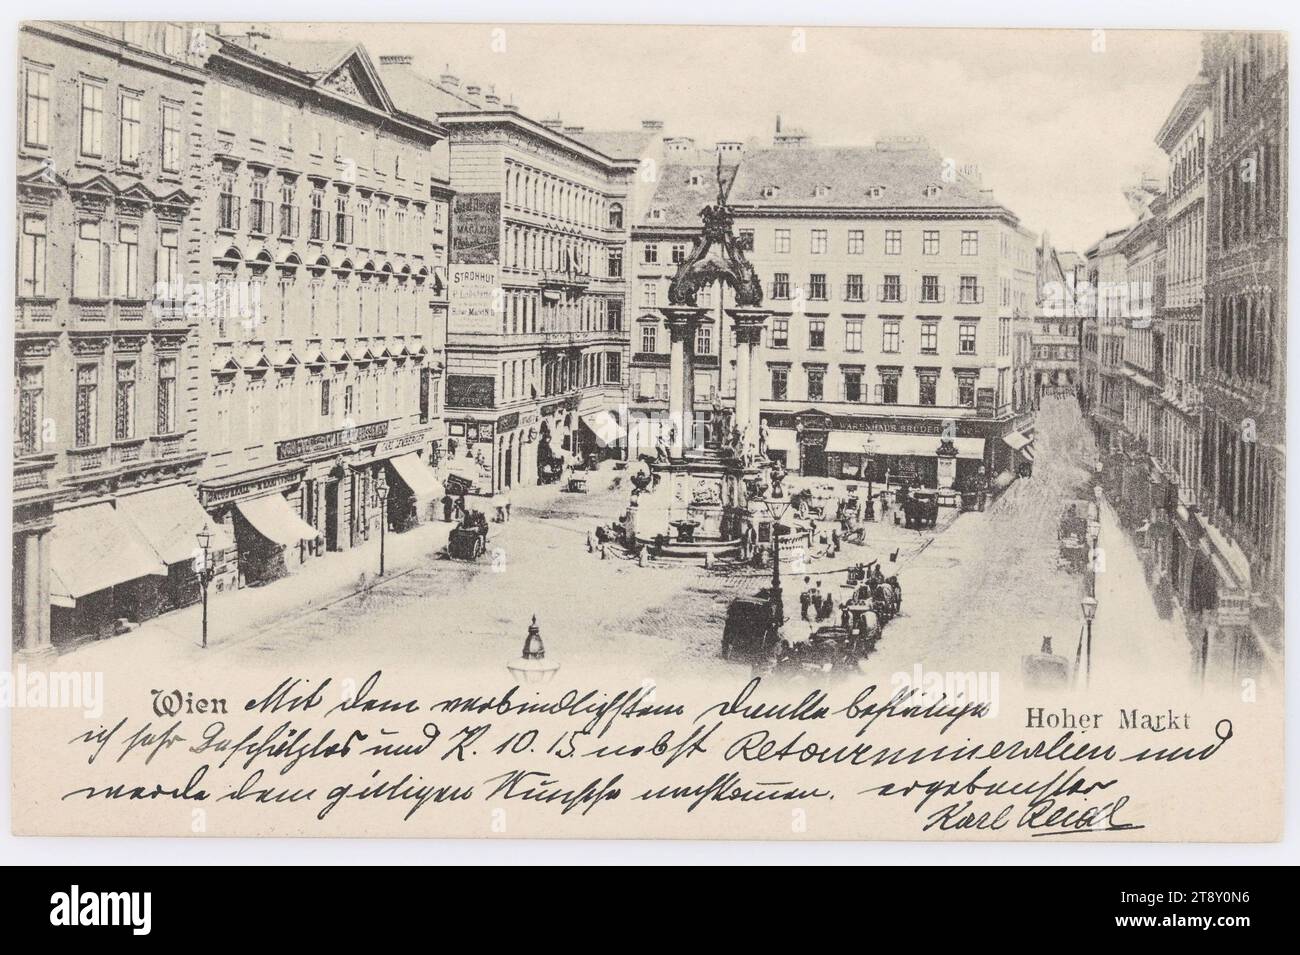 Vienna, Hoher Markt, publisher Anton Böhm, Vienna (A. B. & Co., Vienna), Producer, 1911, paperboard, Collotype, Inscription, TO, Vienna, ADDRESS, Hochwohlgeboren, Herr [..], Vienna III, Marokanergasse 19., MESSAGE, With the most obliging thanks I confirm very much appreciated and K. 10. 15. together with return minerals and will comply with the kind wish. Karl Reidl, Media and Communication, Postcards with transliteration, 1st District: Innere Stadt, ornamental fountain, sculpture, the usual house or row of houses, flat-building, apartment house, house combined with store, with people Stock Photo